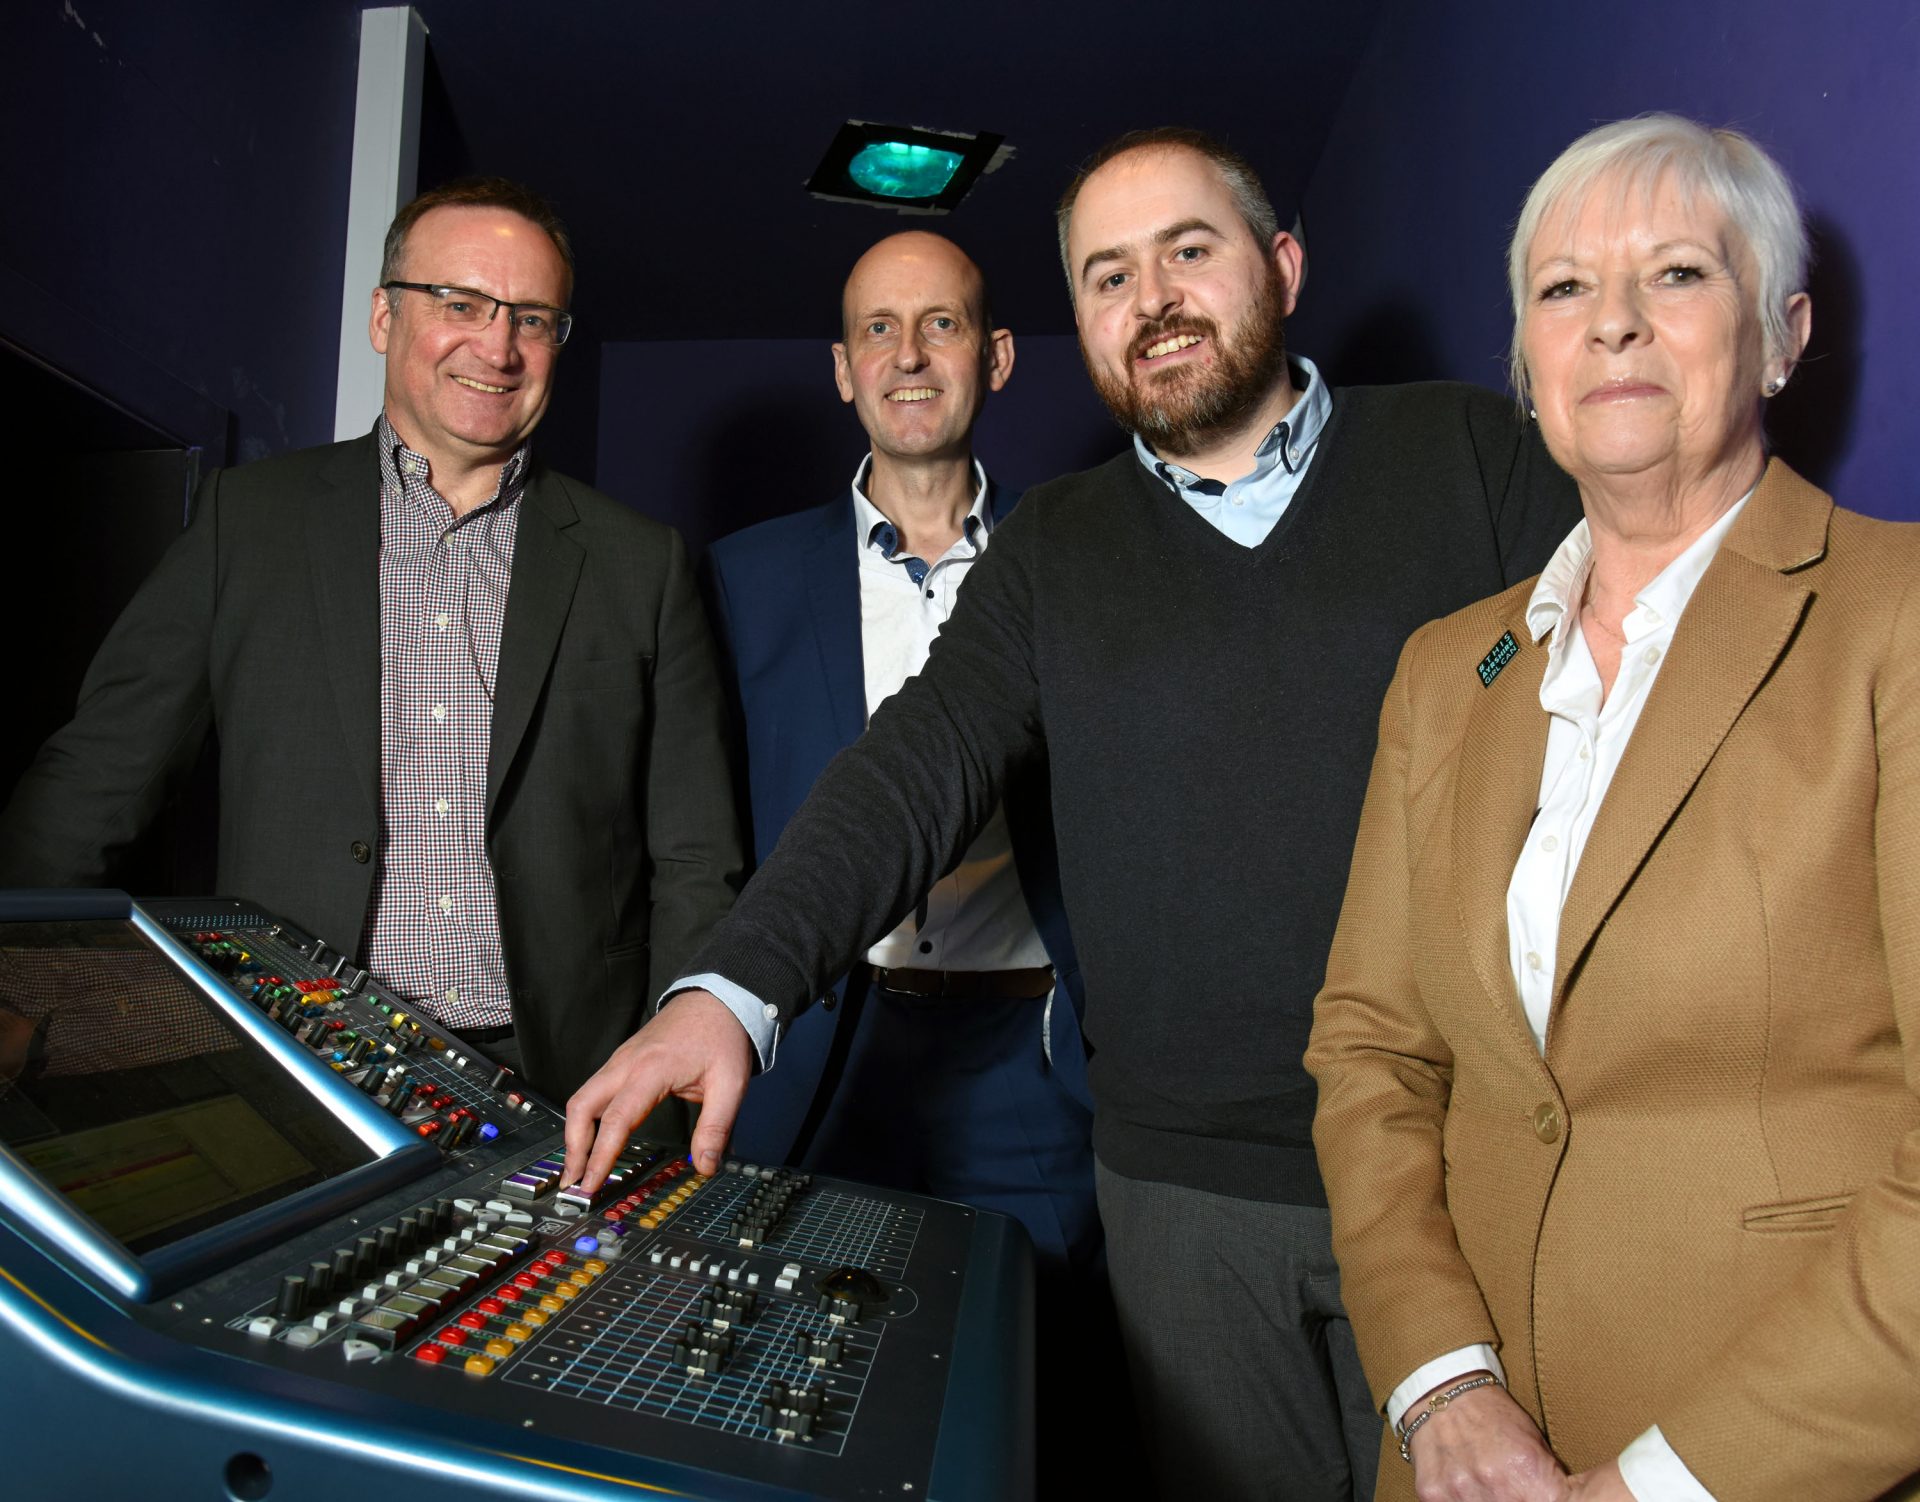 (L-R) Craig Hatton NAC CEO, Dave Tudor MD MMIC, Cllr Joe Cullinane Lleader of NAC, and Val Russell, CEO Ayrshire Chamber at the film and website launch